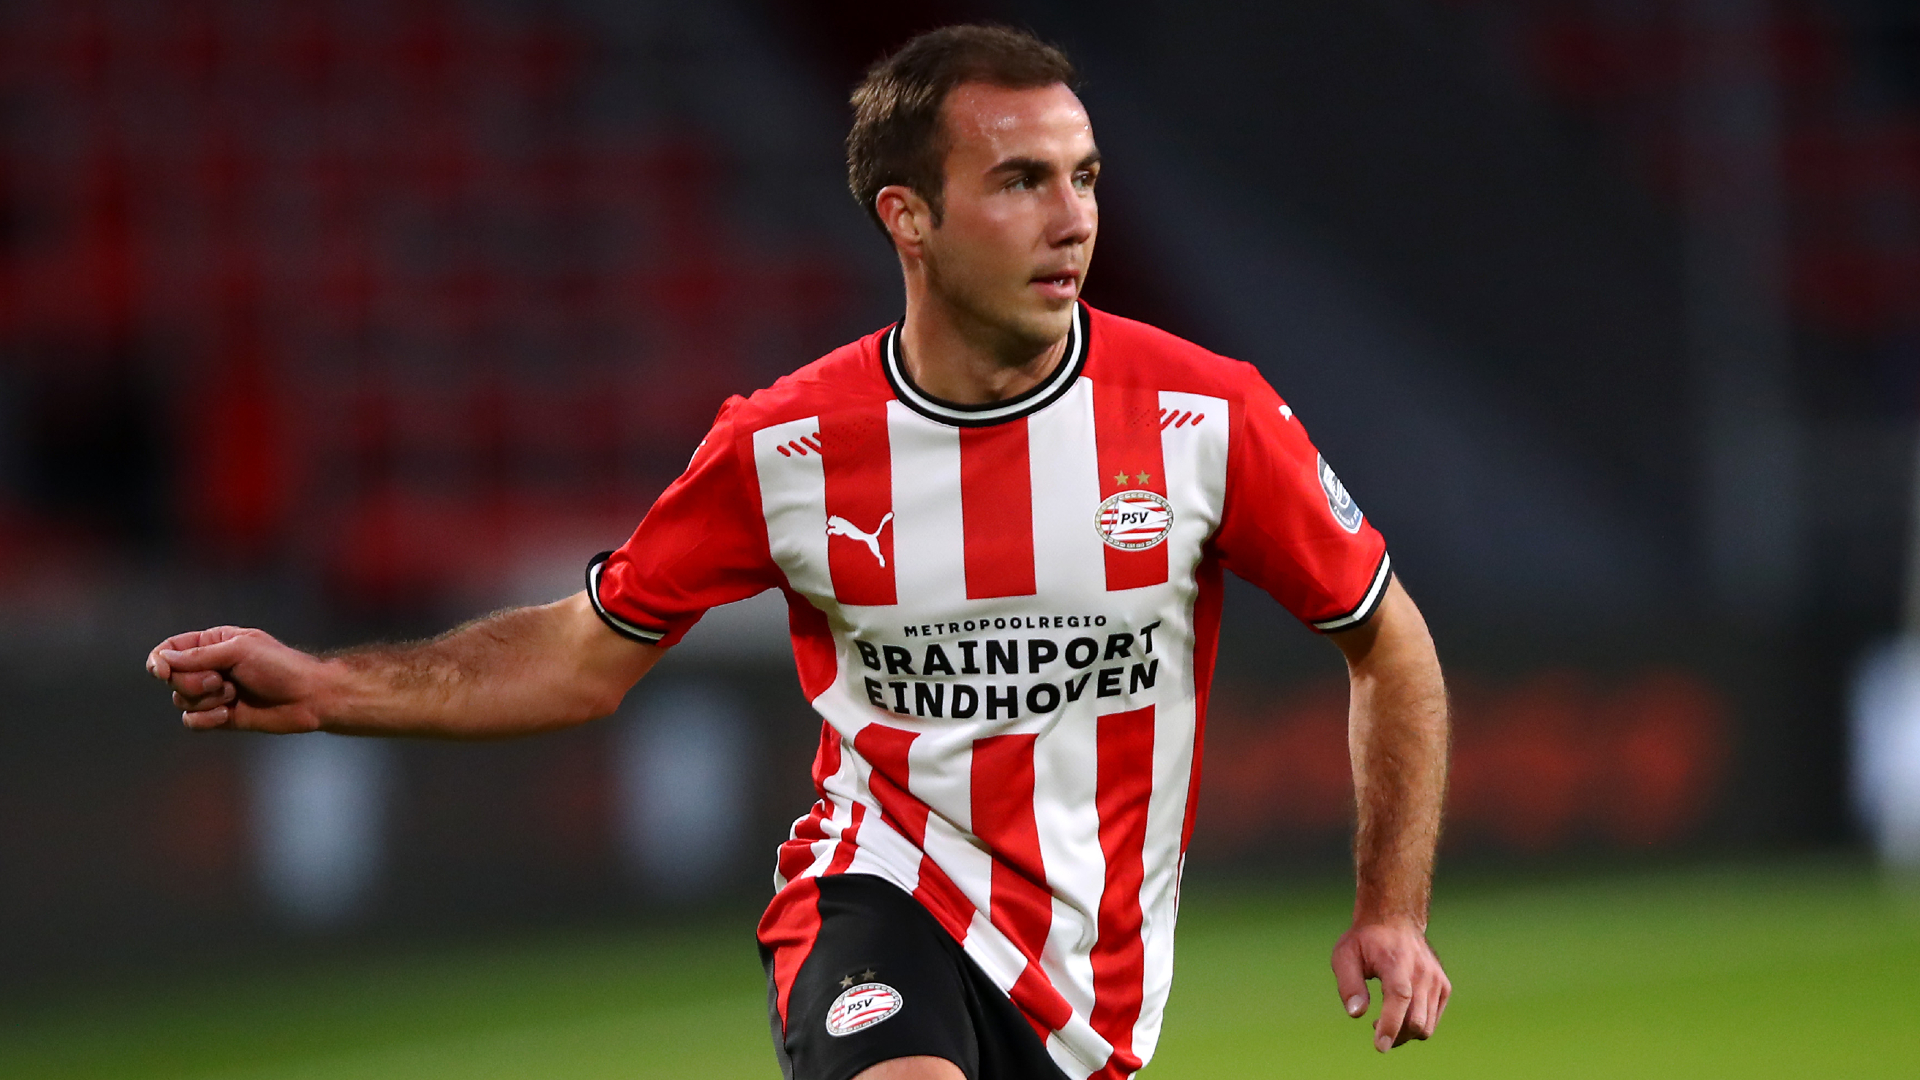 Gotze reveals he could have returned to Bayern Munich but says he's loving football again at PSV